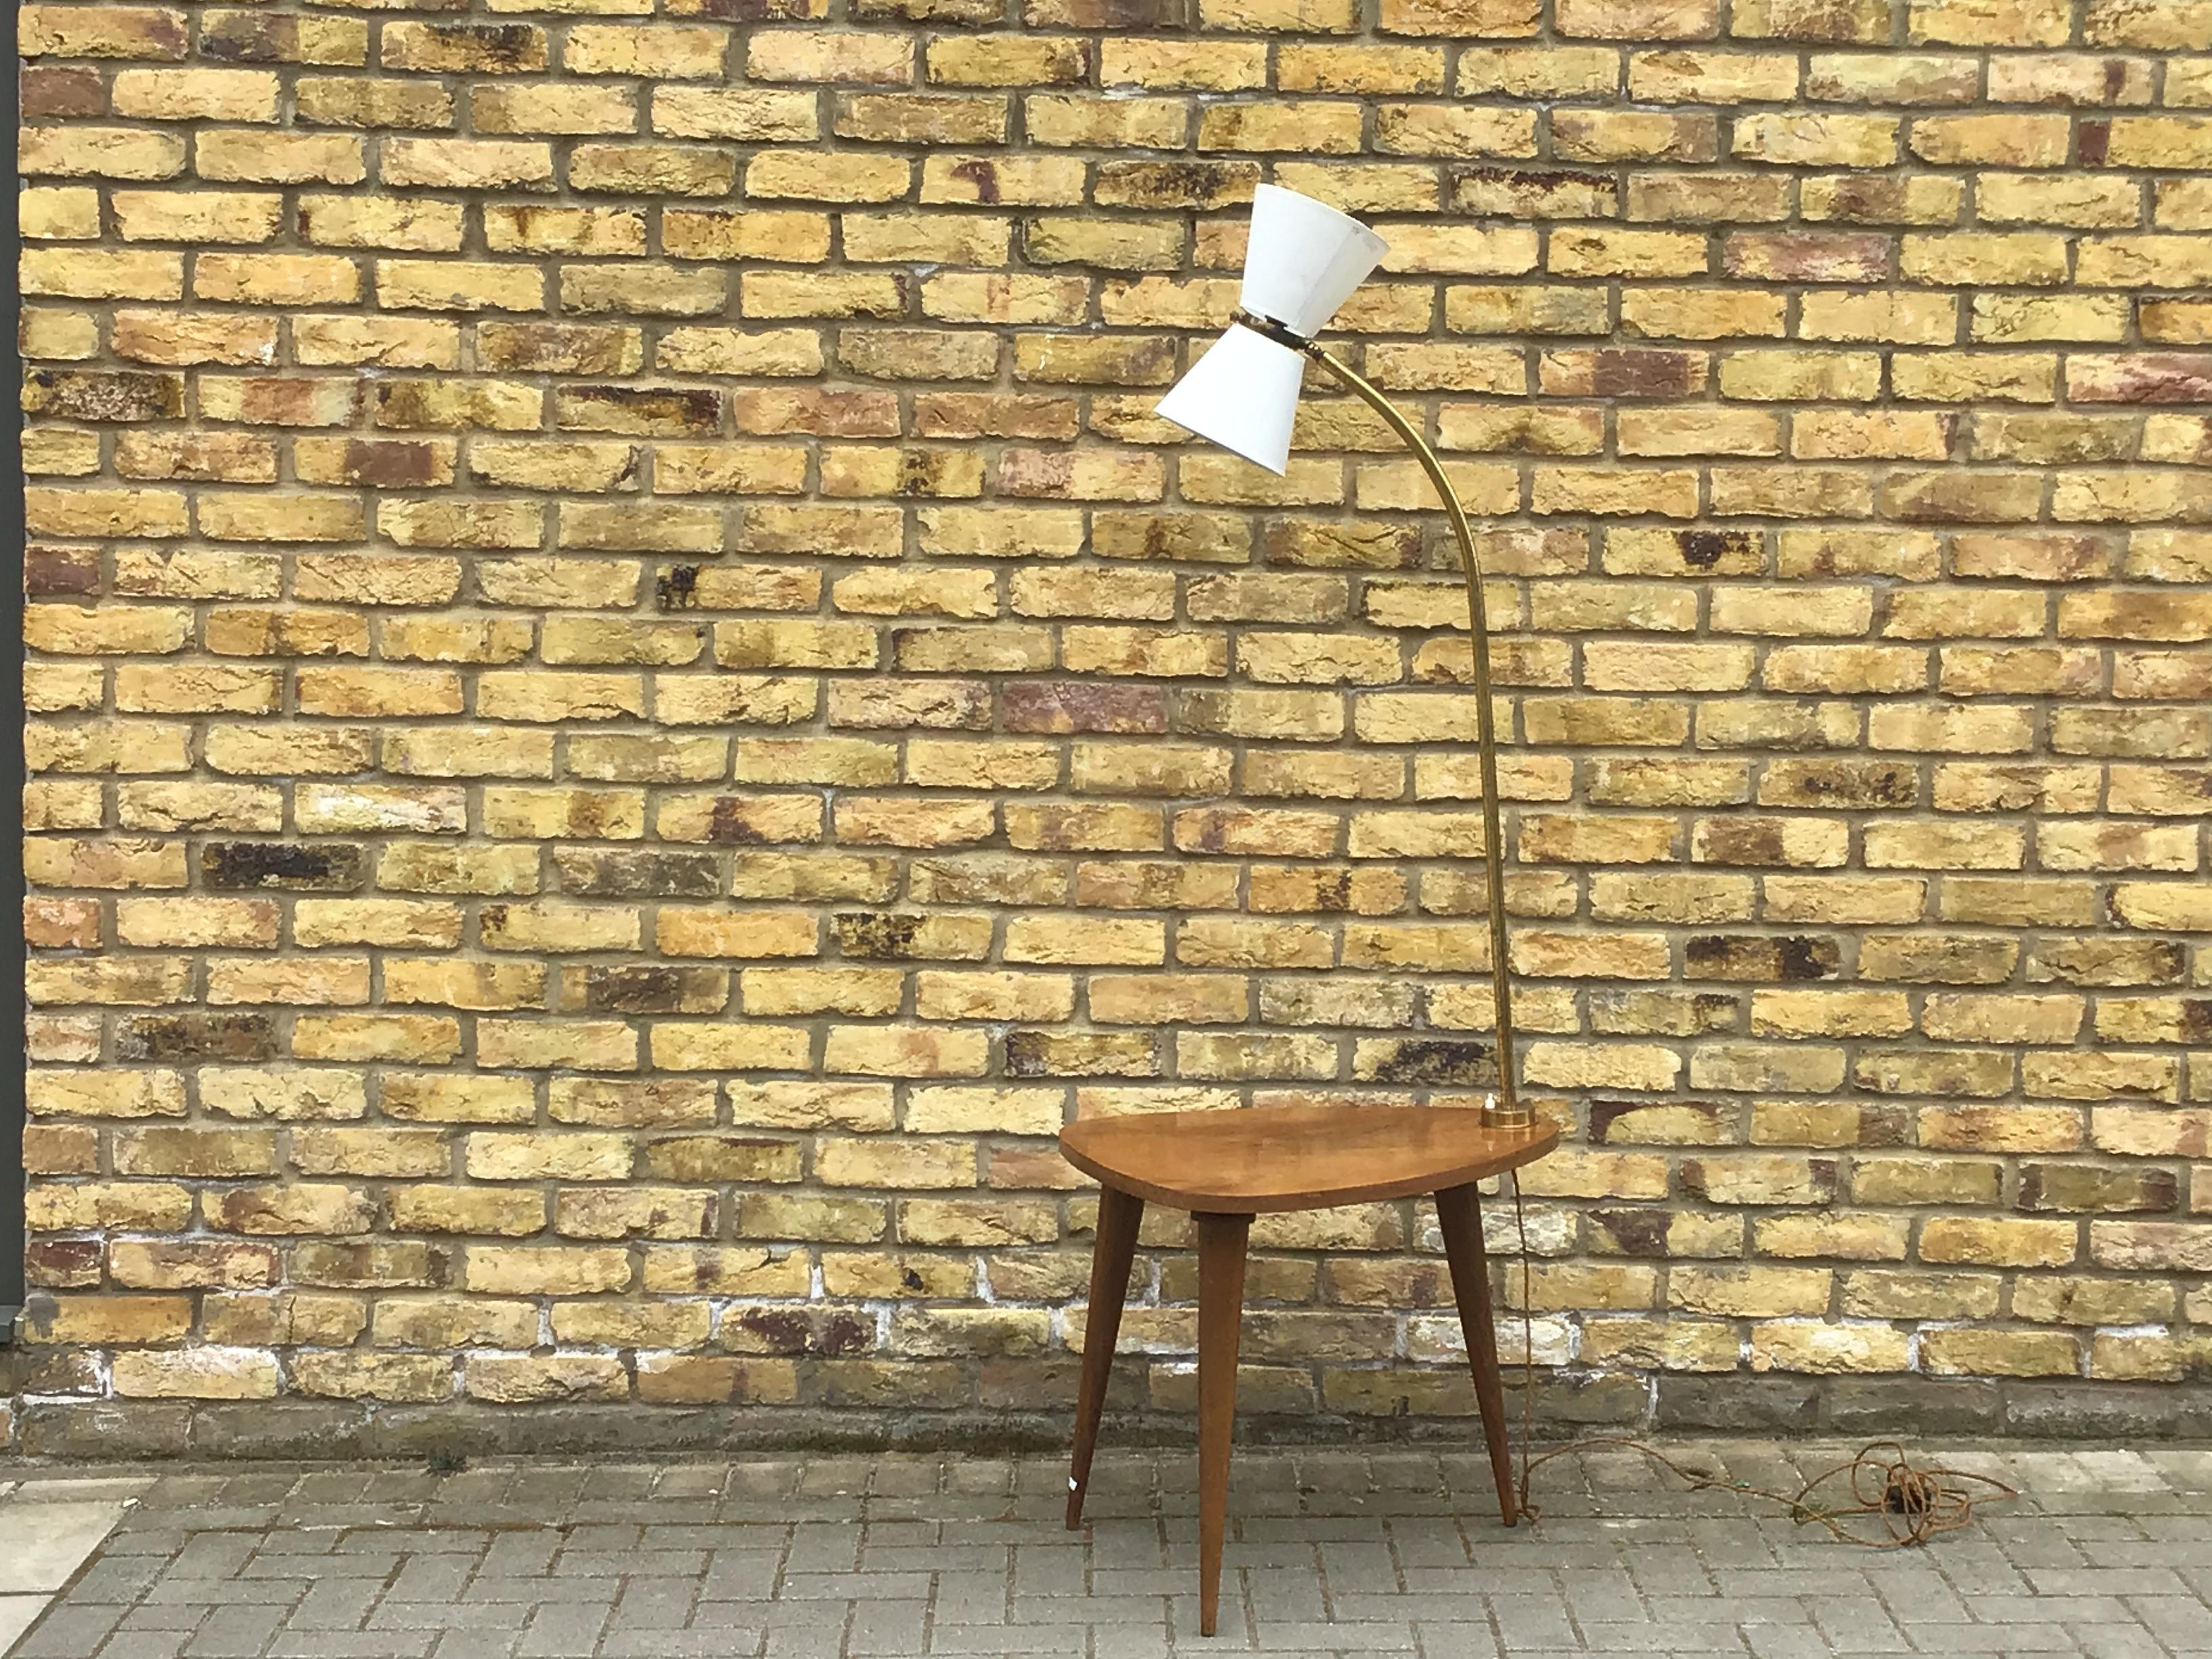 Brass and wood floor lamp with a table designed together lovely tapered legs
and brass stem adjustable shade,
circa 1950s, French.